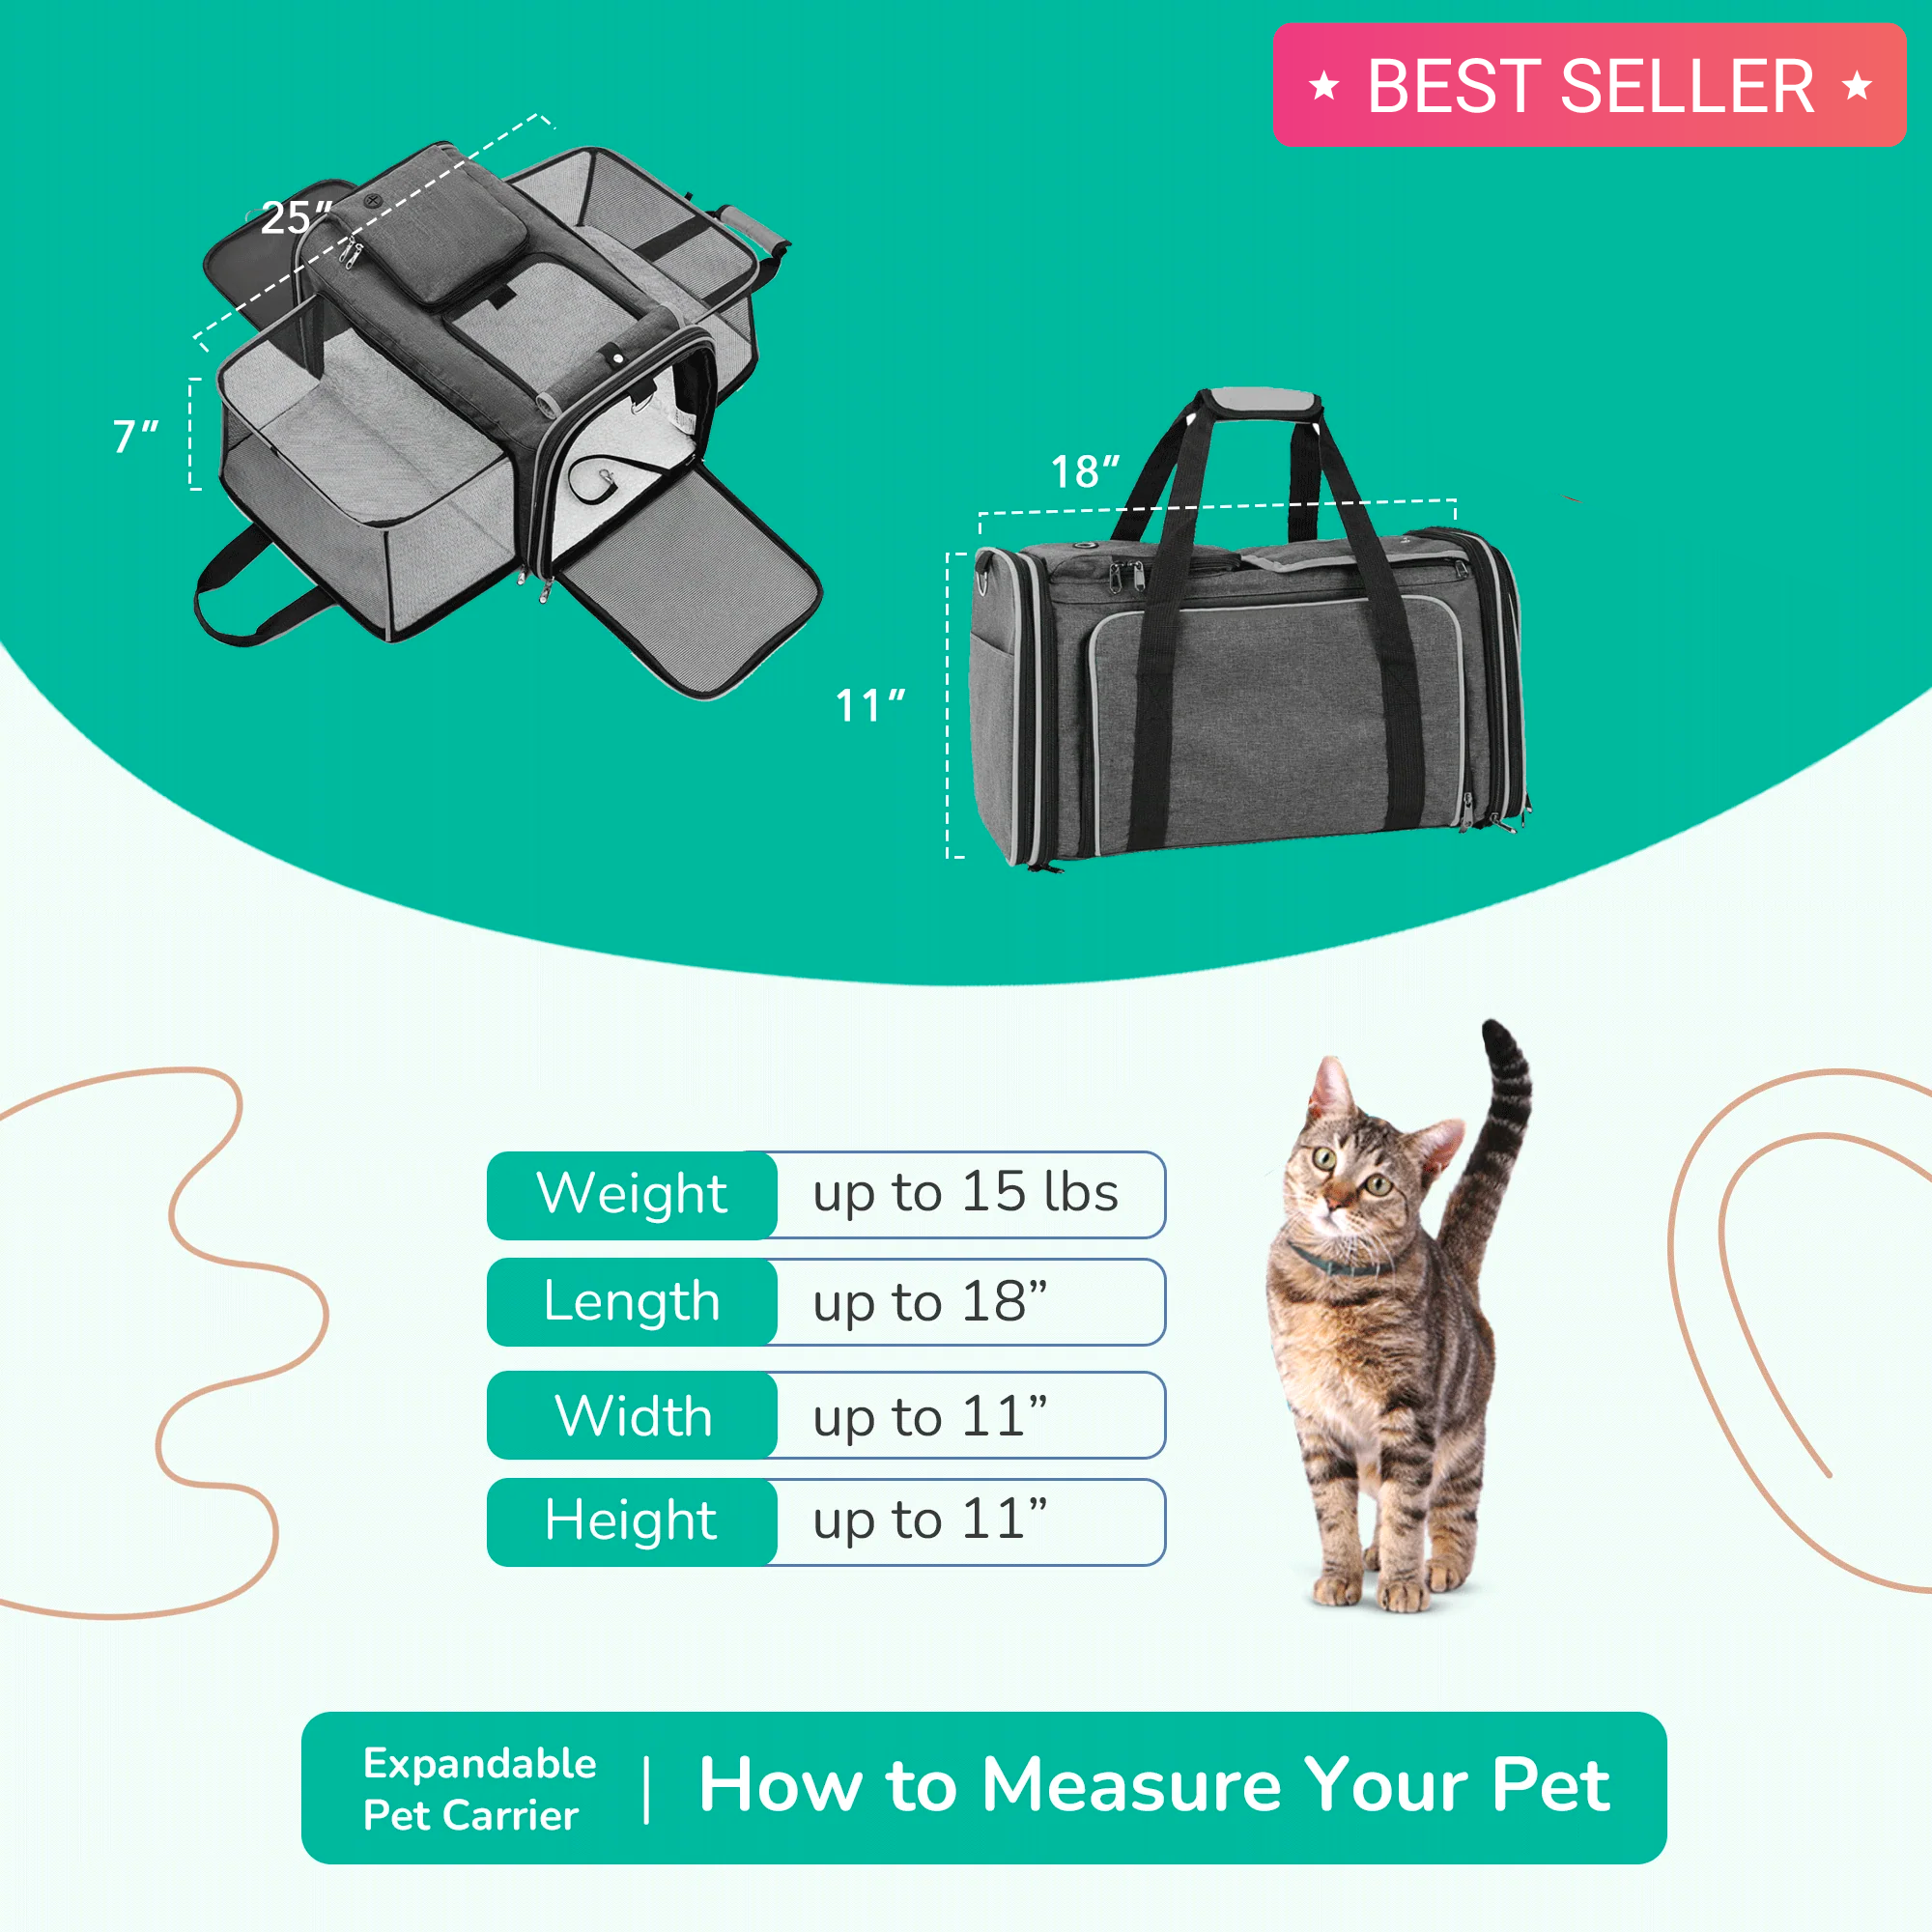 LONGRV Cat Carrier Backpack, Small Dog Bubble Bag for Small Dogs, Space Pet  Carrier Dog Hiking Backpack Airline Approved Travel Carrier - Black -  Walmart.com